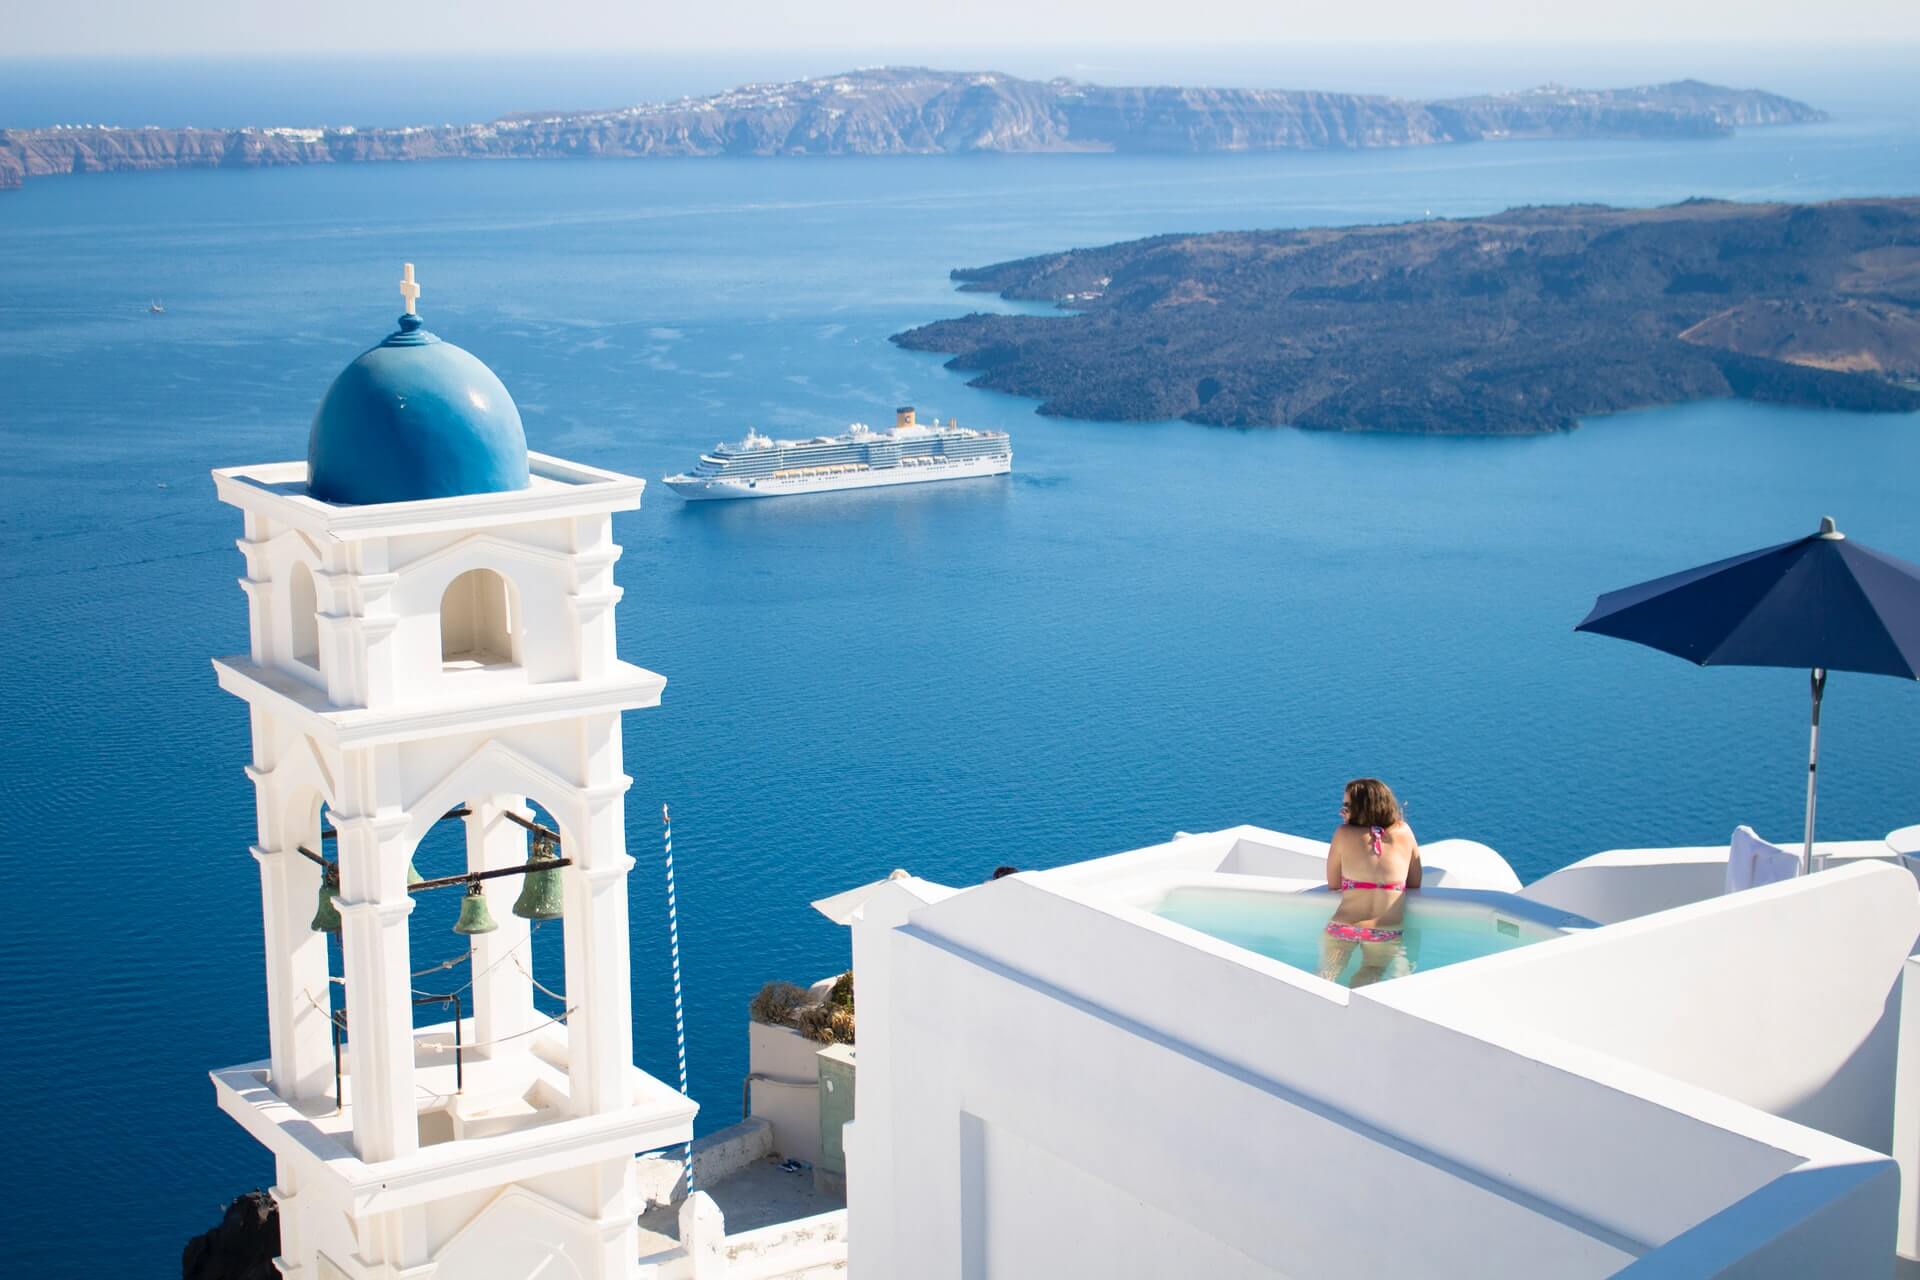 A tourist in Oia, Santorini, enjoying the pool at her accommodation